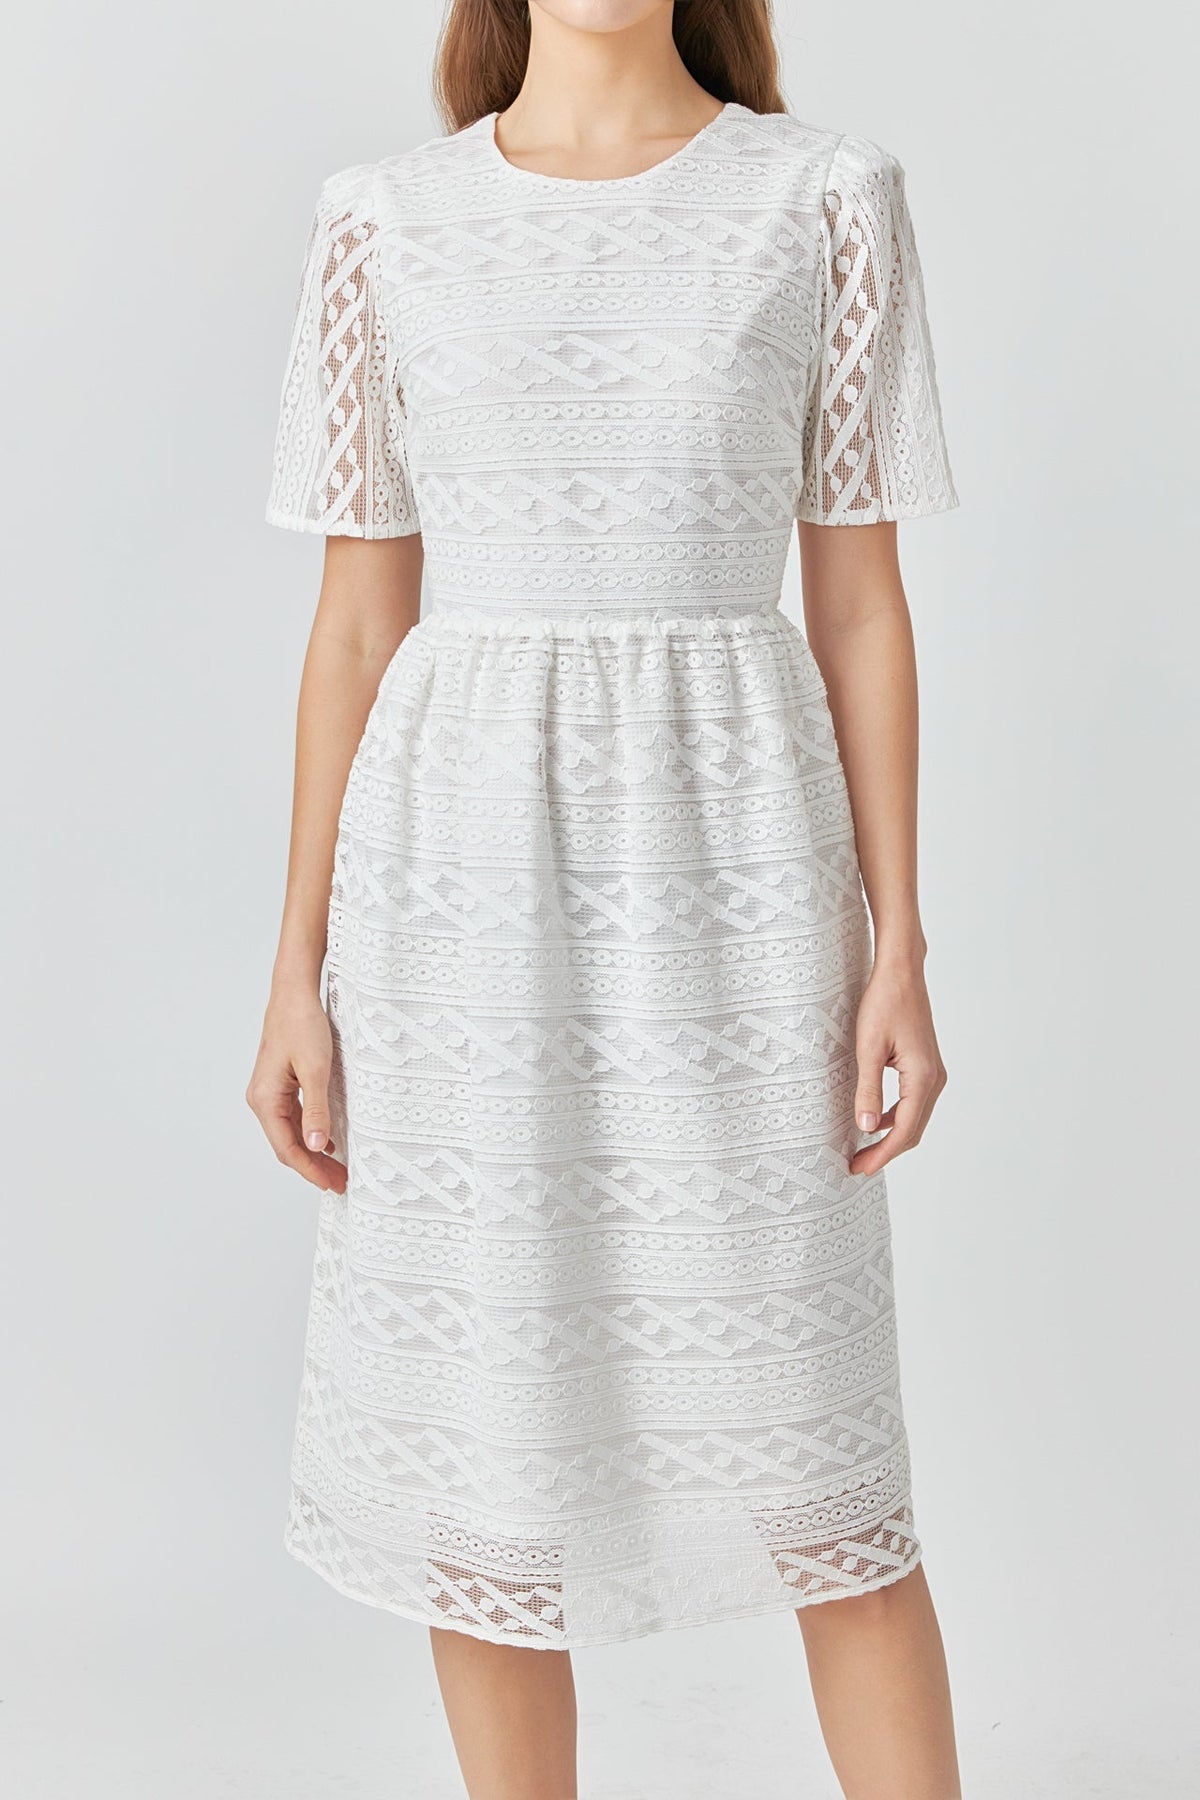 ENDLESS ROSE - Lace Midi Dress - DRESSES available at Objectrare